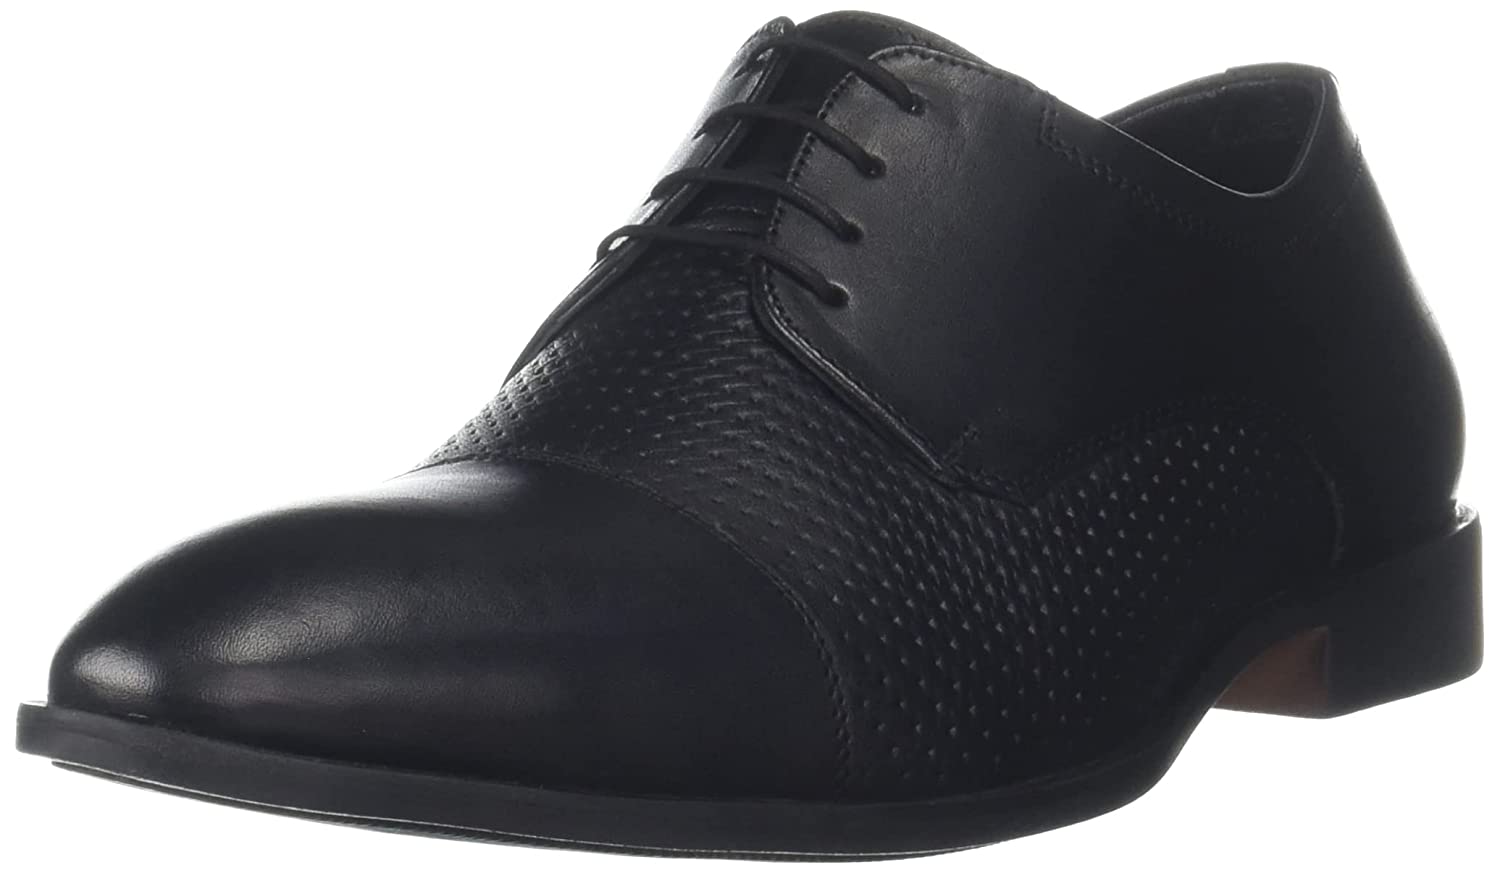 Hush Puppies shoes for men